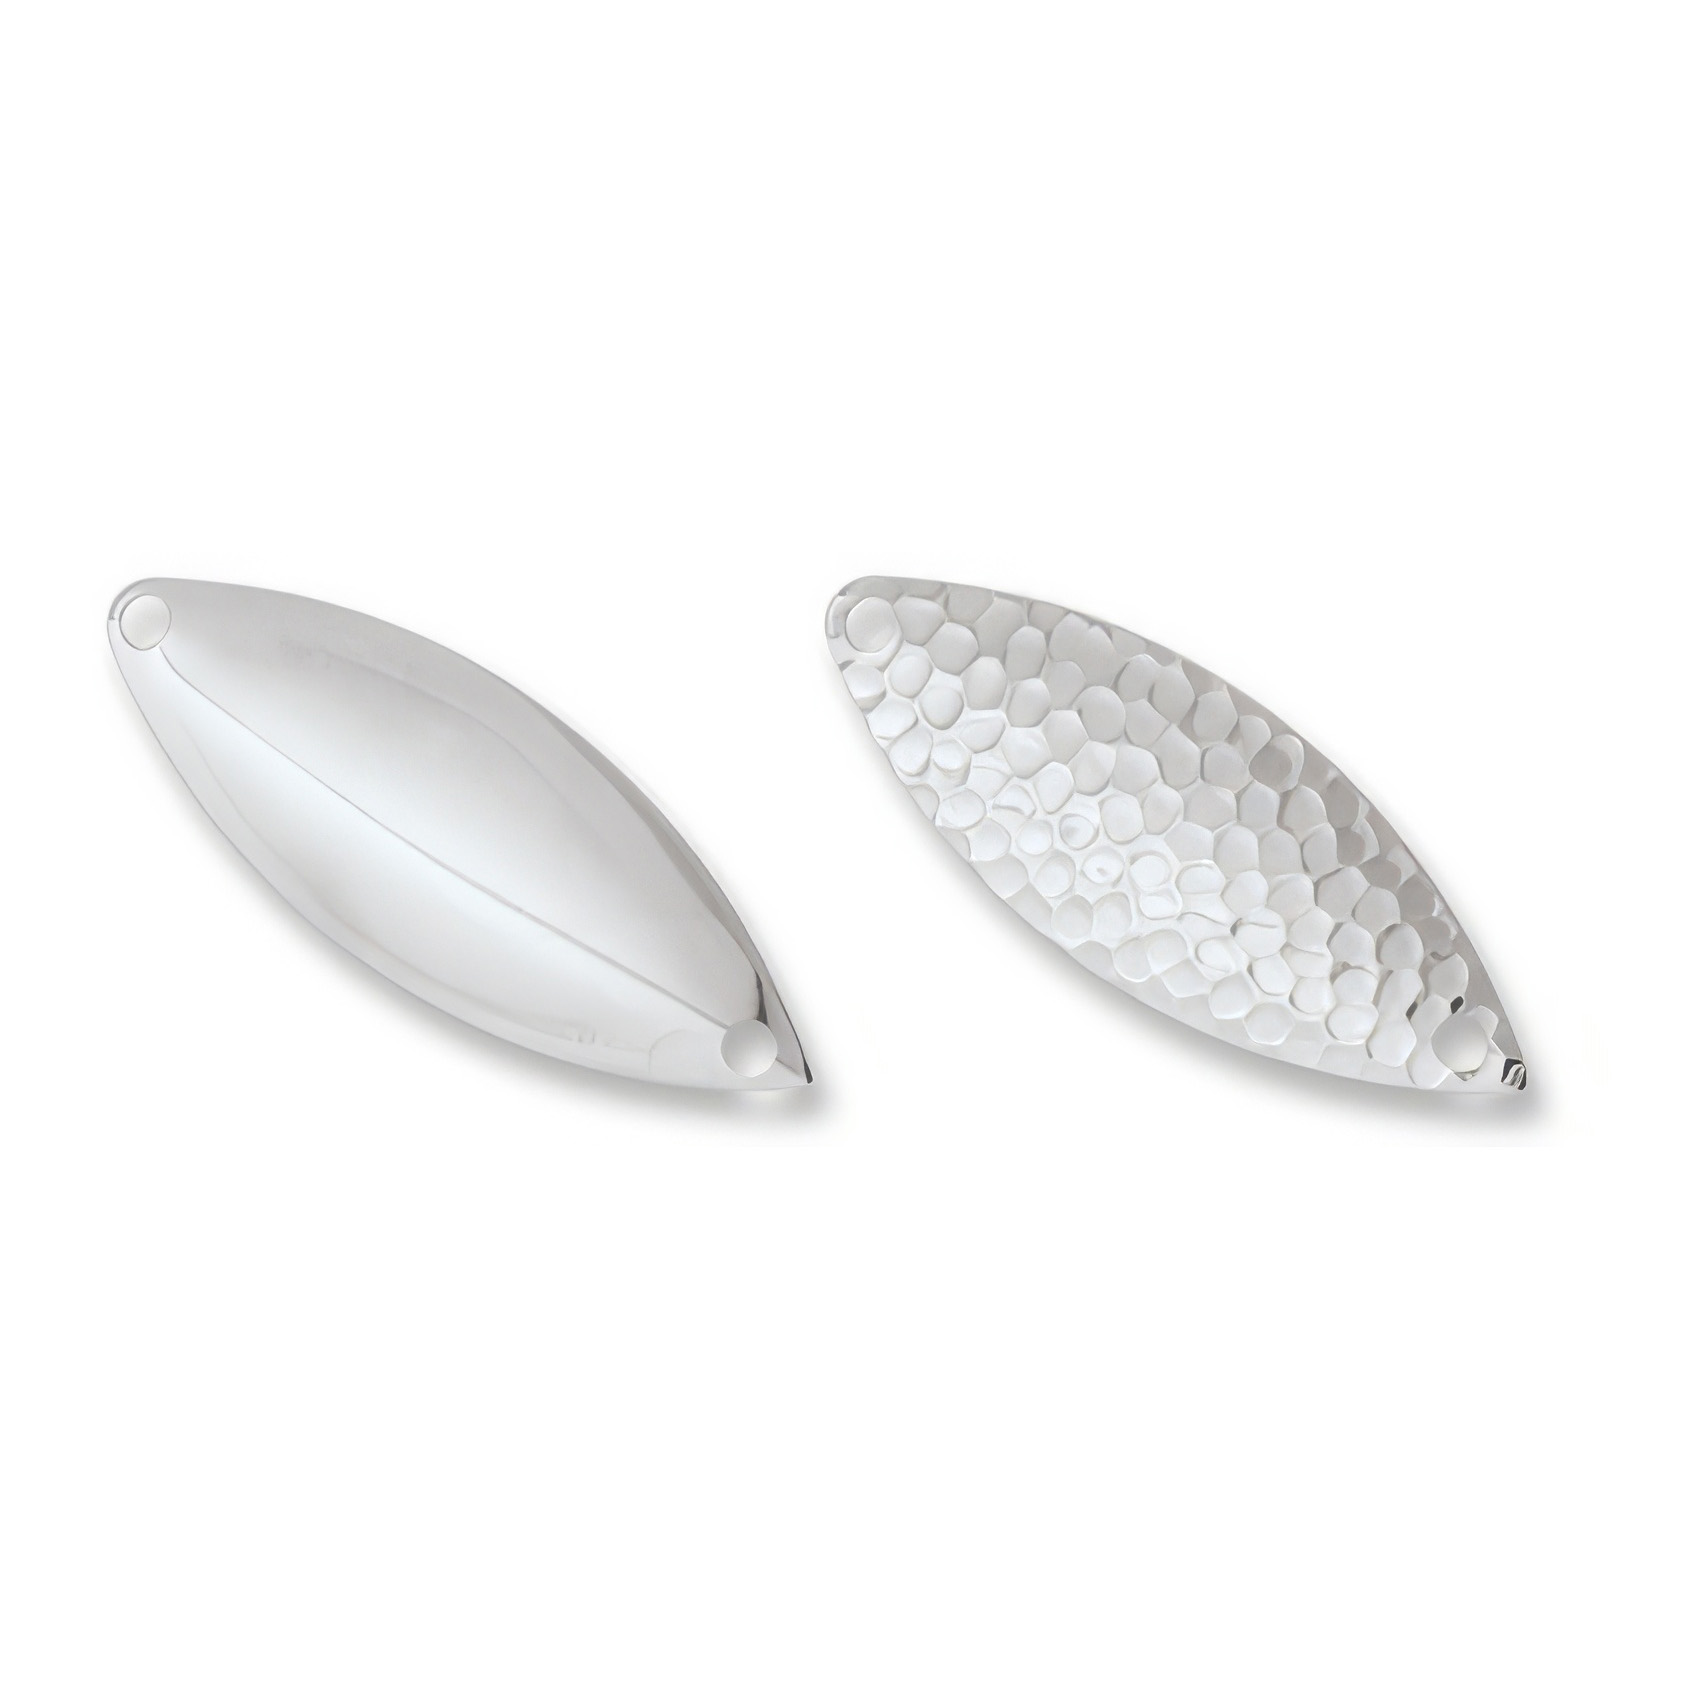 Willowleaf Spoons - Lakeland Component Solutions